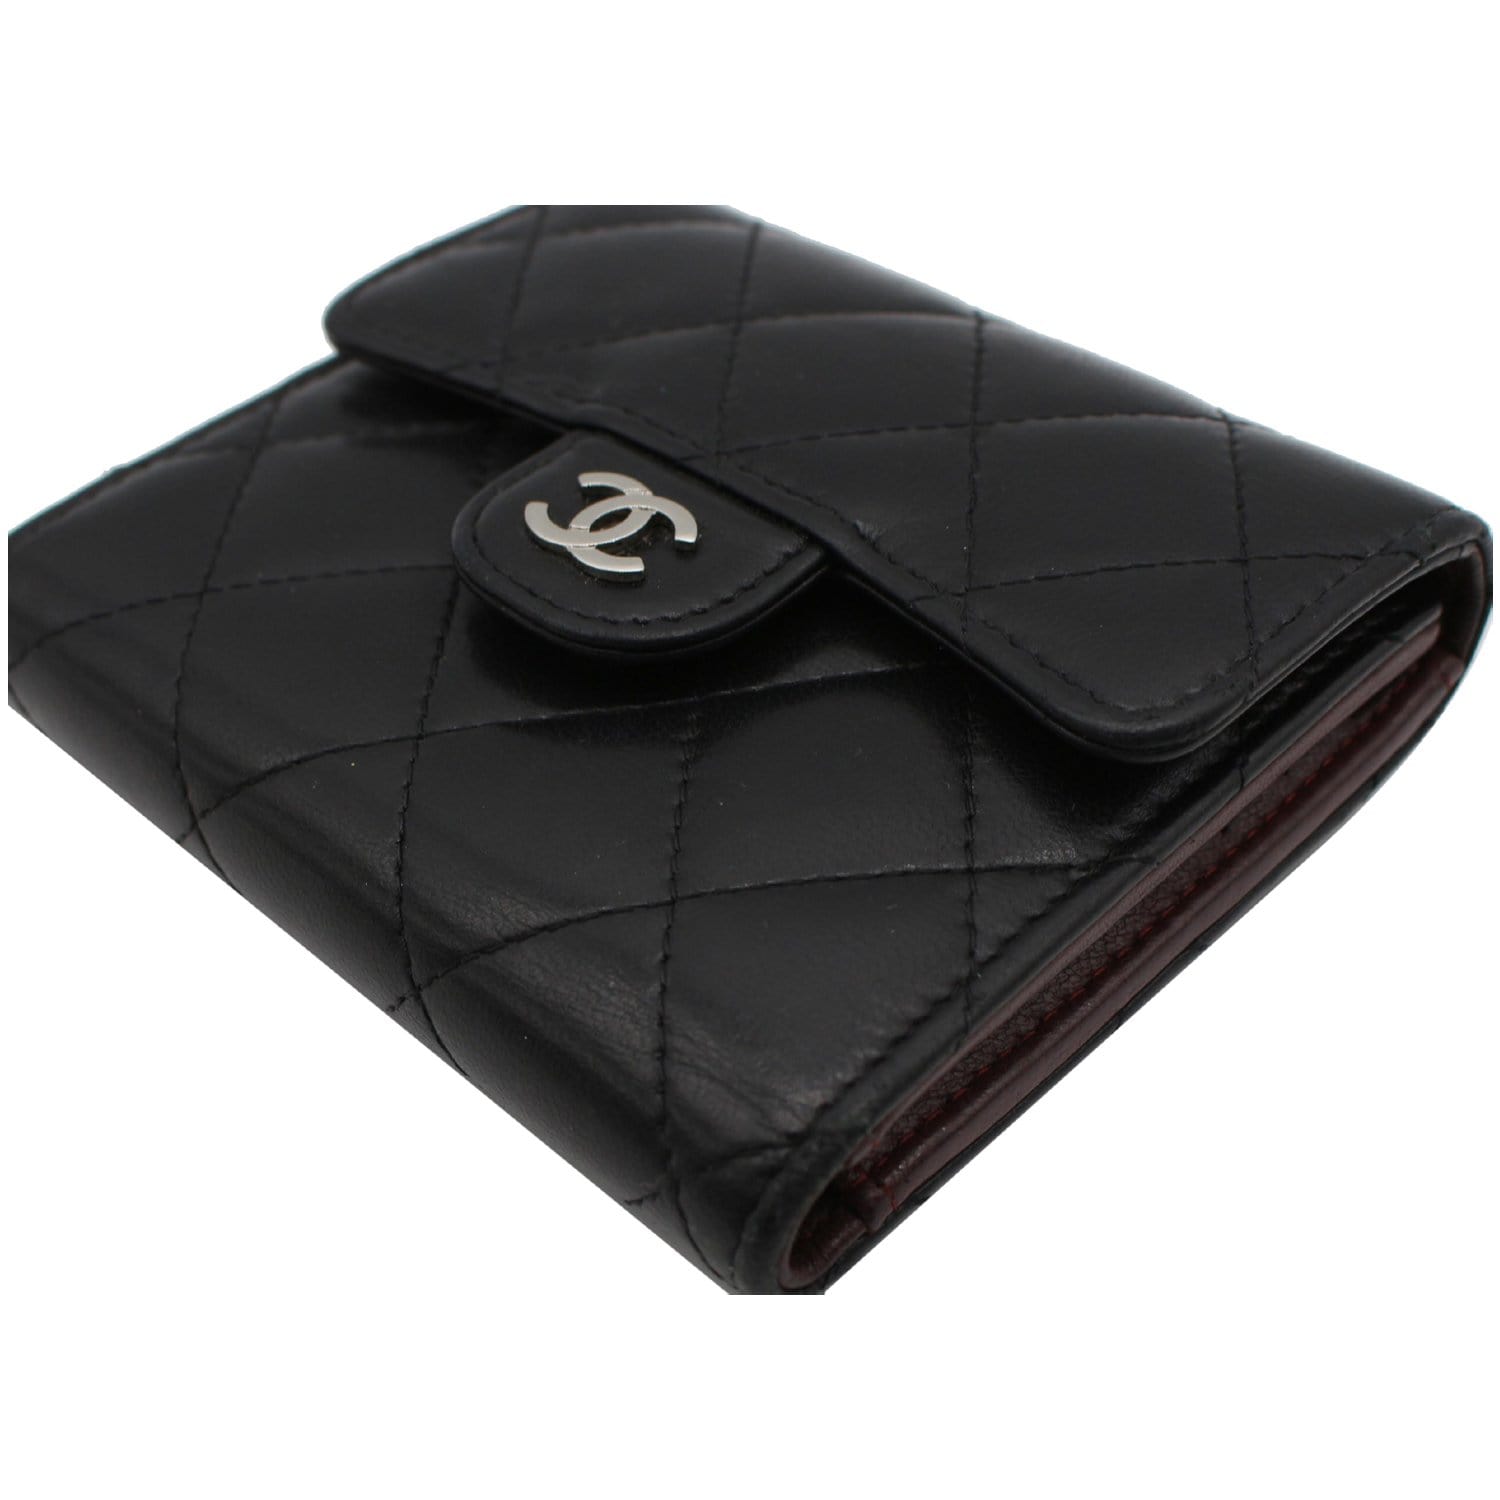 CHANEL Caviar Quilted Small Flap Wallet Gray